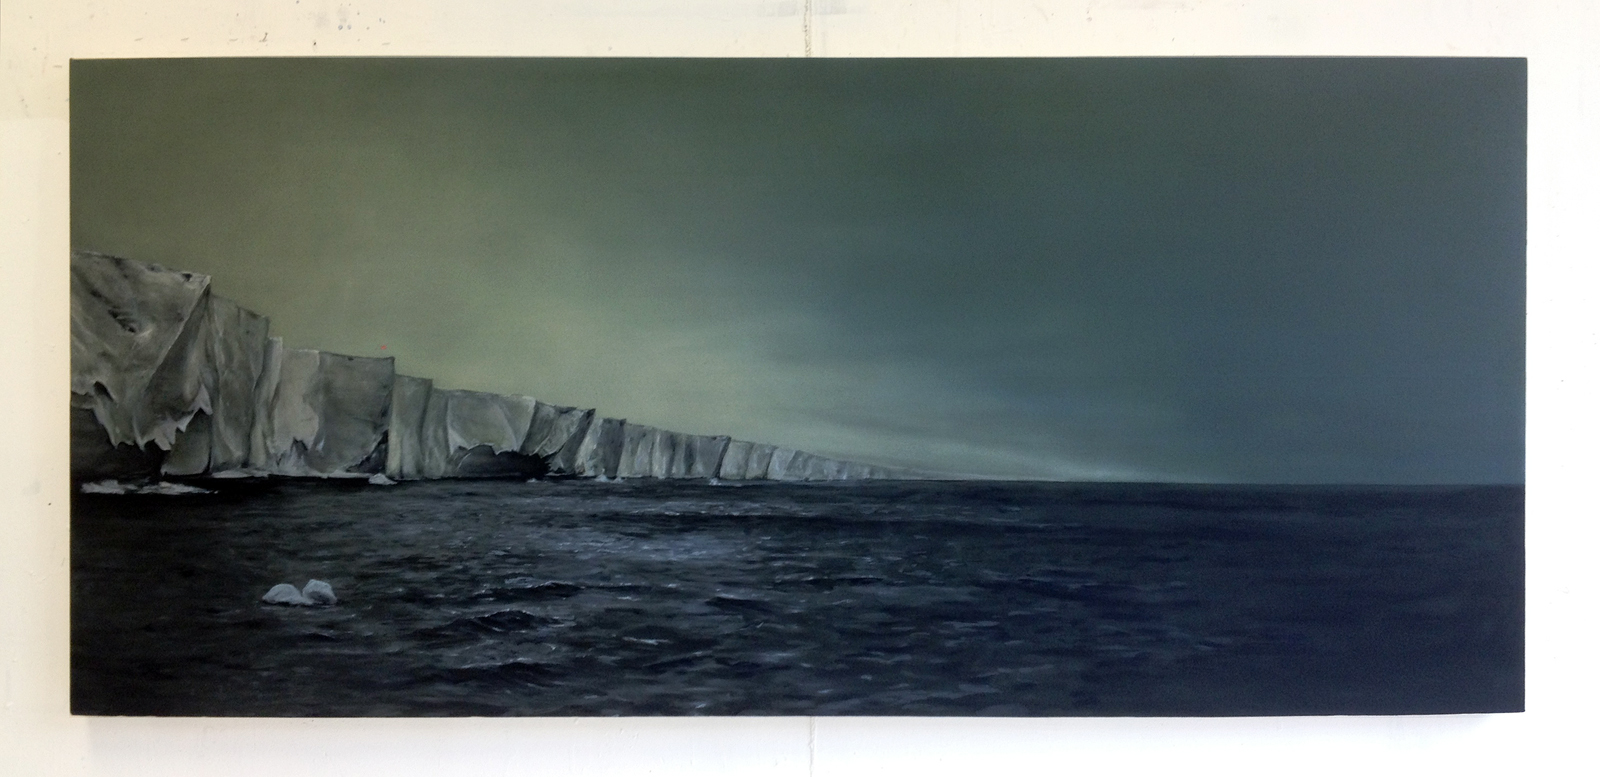   Conquest (Ice Shelf),  2012 Oil on canvas 32 x 72 inches 